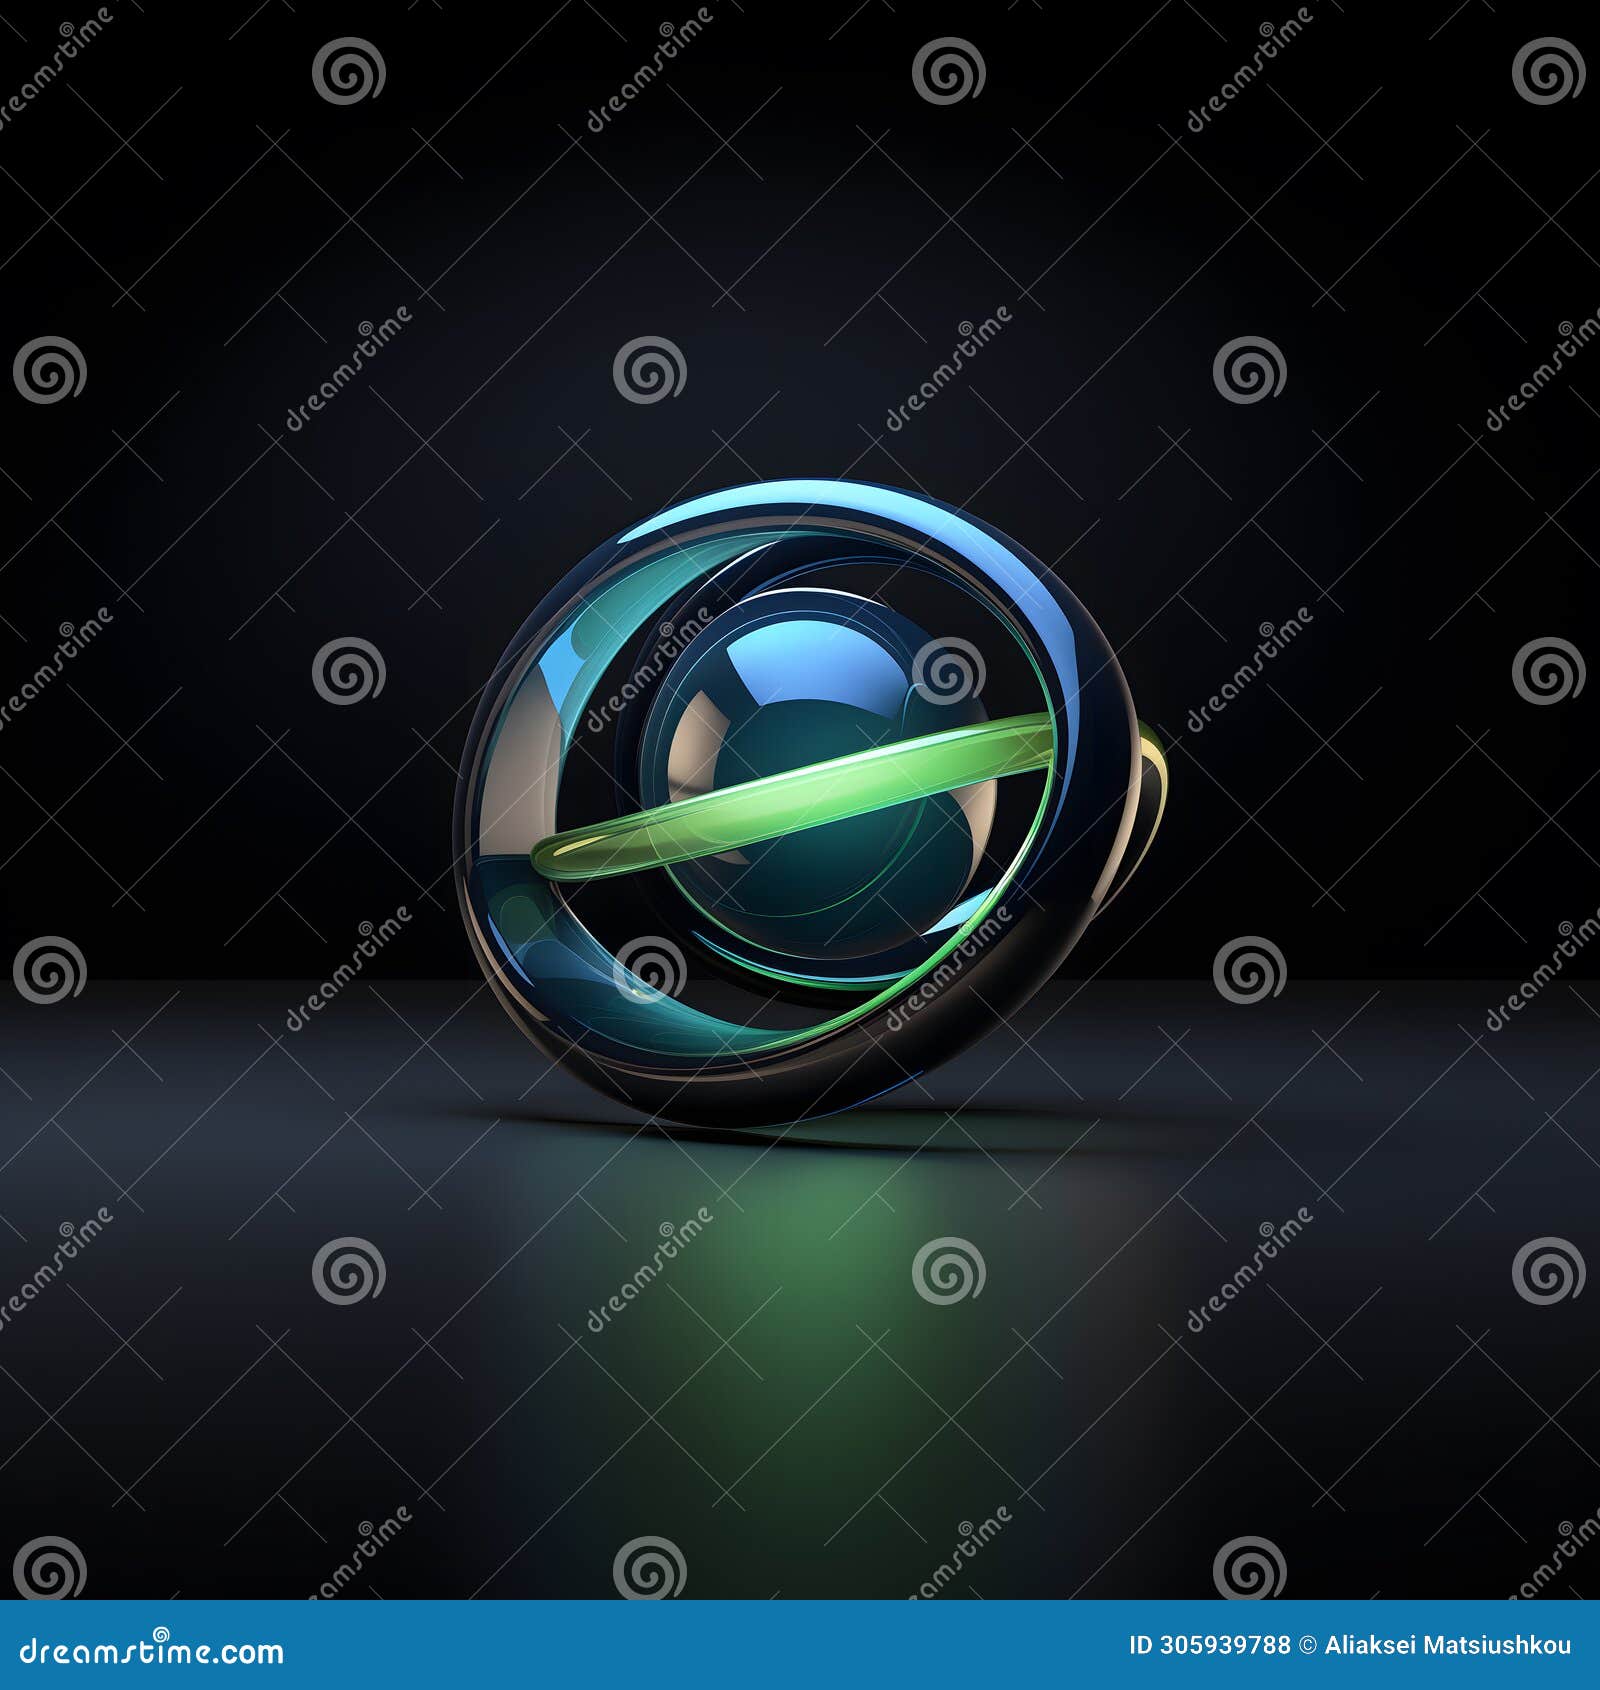 A Beautiful Futuristic Logo with Green and Blue Lights Stock Photo